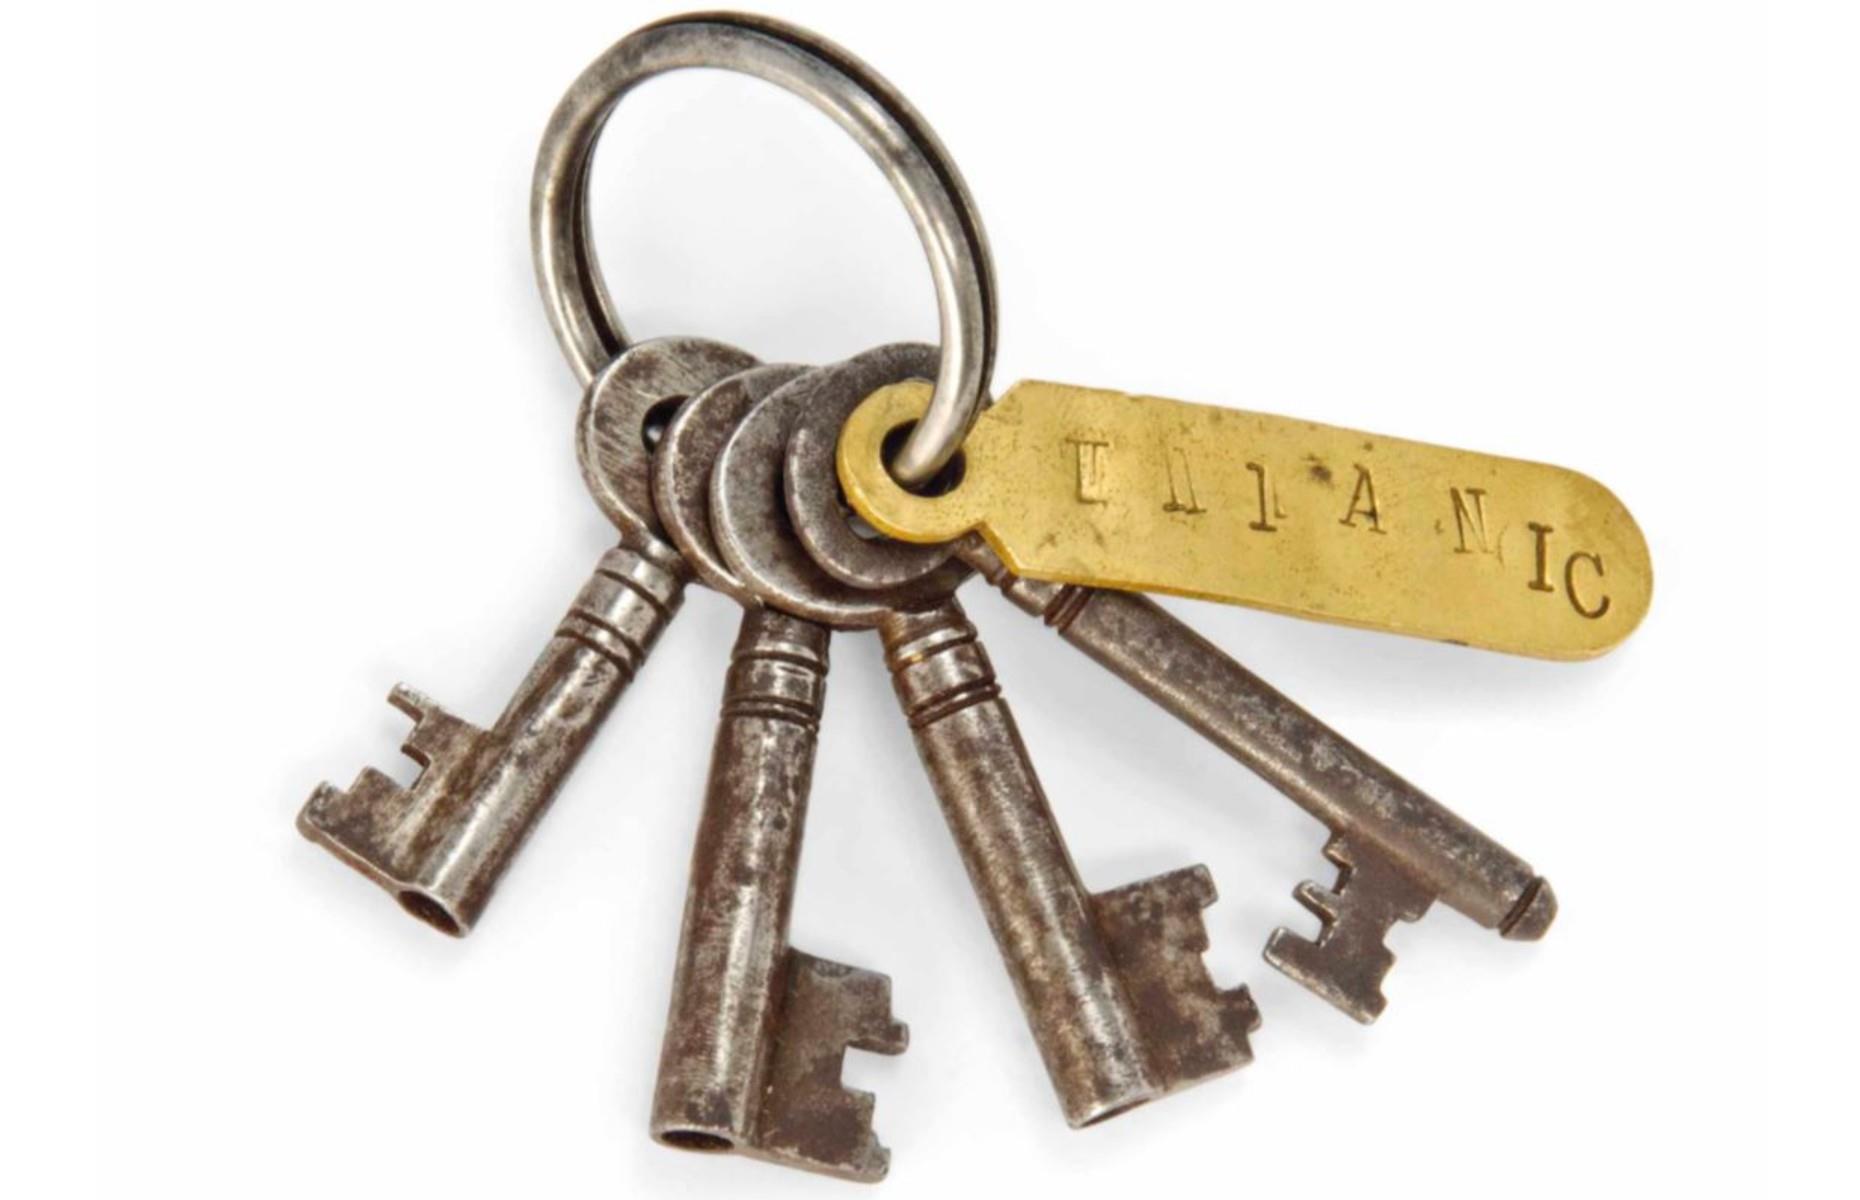 <p>These keys belonged to 43-year-old Samuel Ernest Hemming, who had been at sea since the tender age of 15 and was working as the Titanic’s resident lamp trimmer during its first voyage. On the night of the collision, Hemming was jolted awake by the noise of air escaping from the exhaust tank, but after reporting the noise he decided to go back to bed. Just a few minutes later the seafarer was told that he had just half an hour left to live. Hemming assisted passengers into the limited number of lifeboats but didn’t hurry onto a boat himself, reportedly telling an officer: “Oh, plenty of time yet, Sir”. When the ship finally sunk, Hemming was plucked out of the icy water by lifeboat number four. </p>